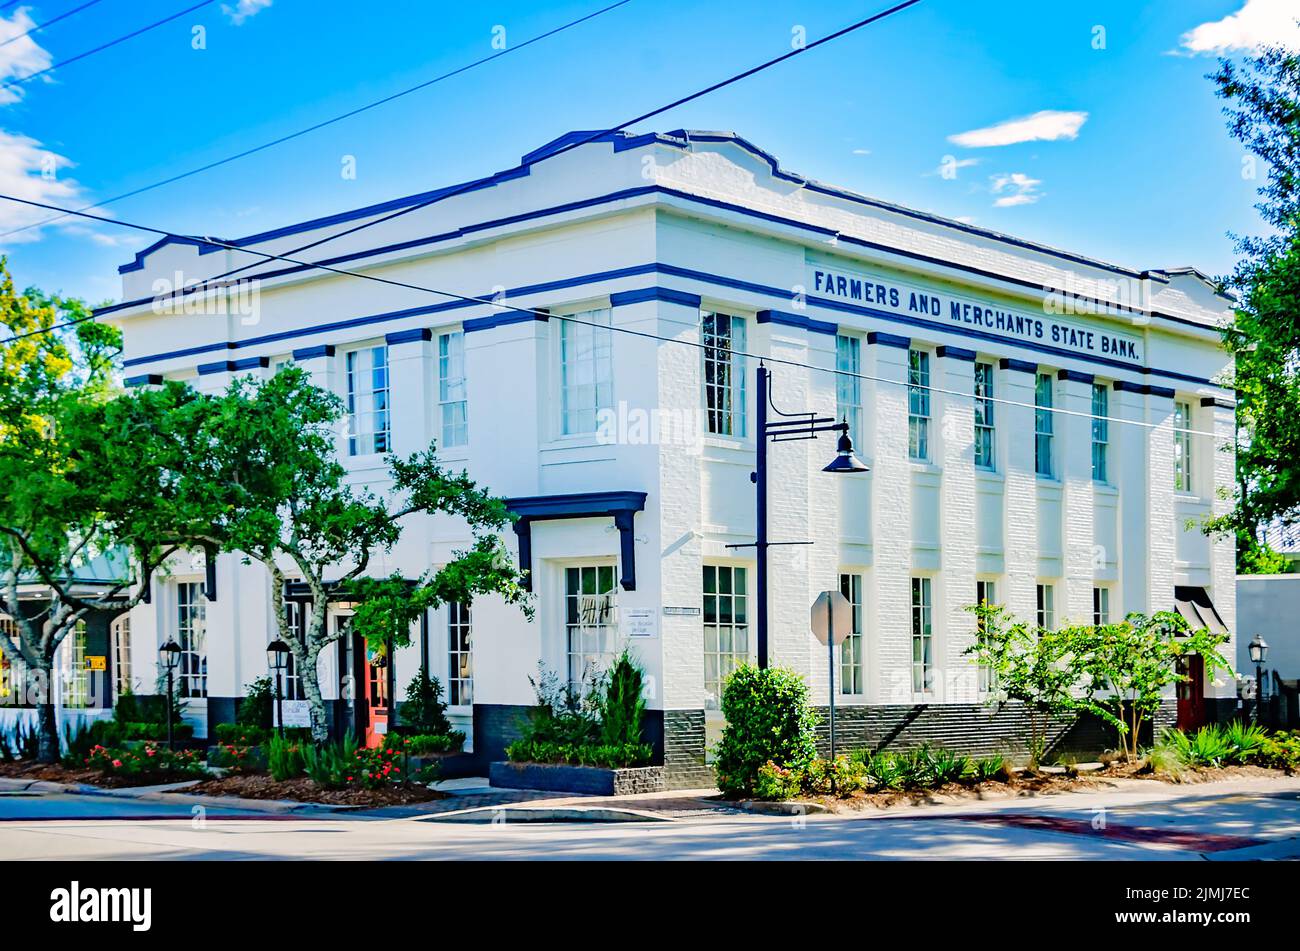 The Old Farmers and Merchants State Bank is pictured, July 31, 2022, in Ocean Springs, Mississippi. Stock Photo